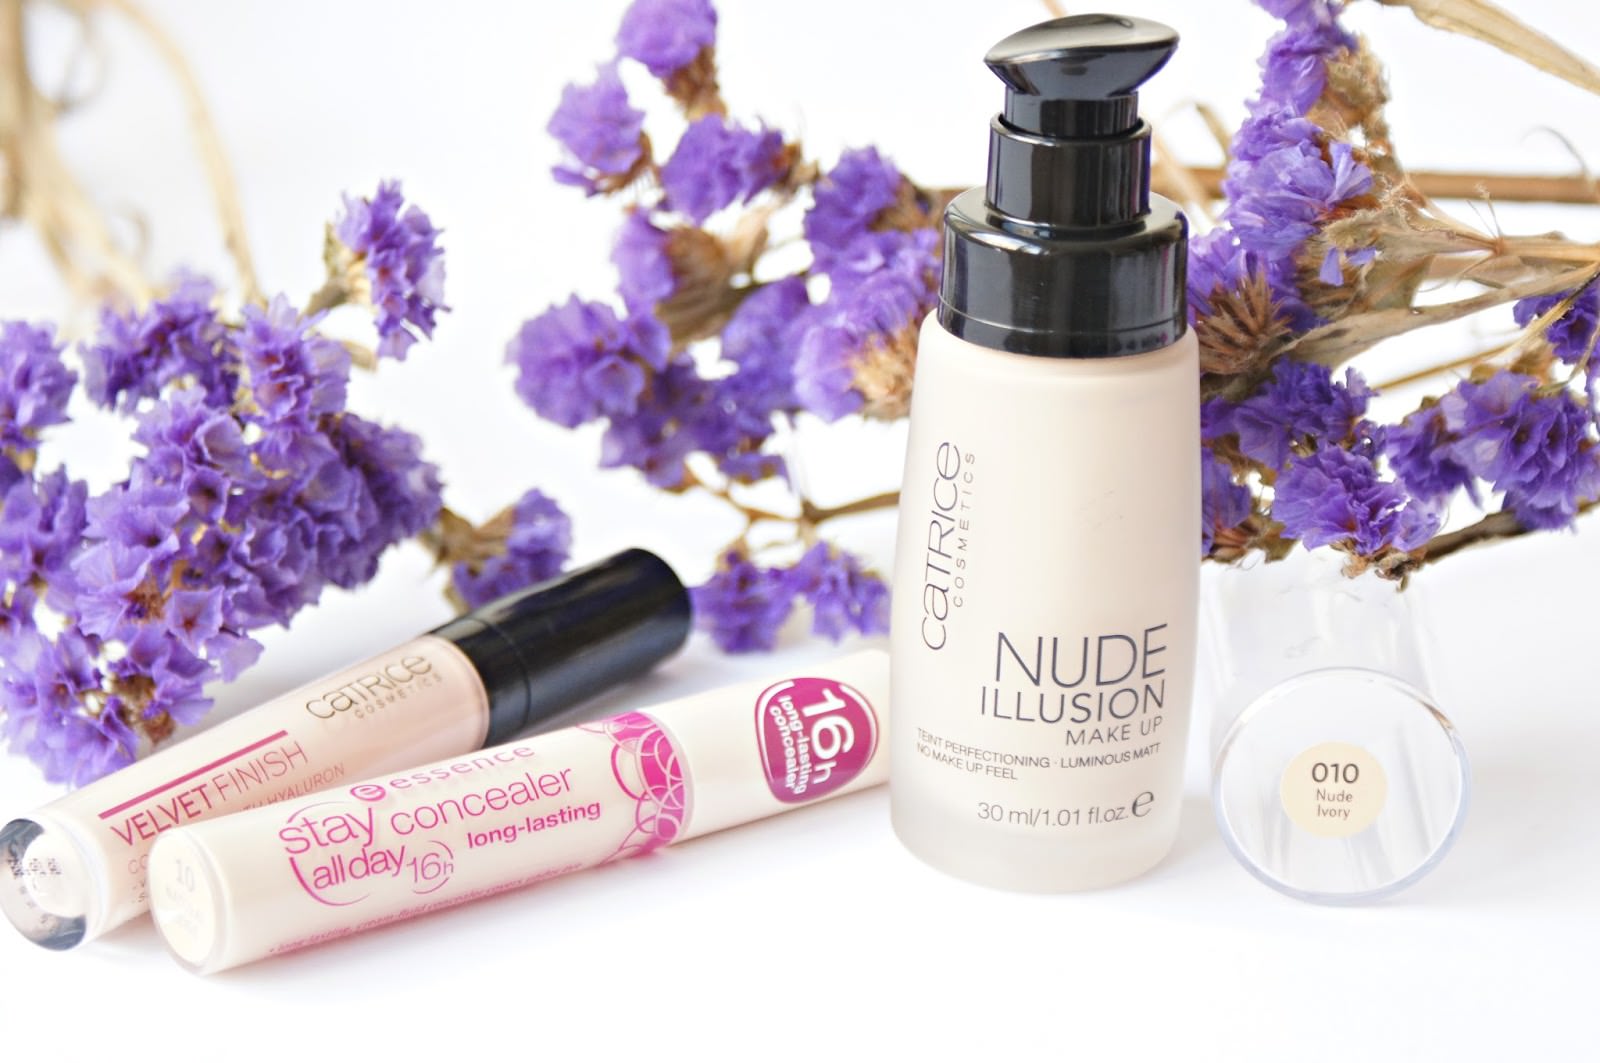 Catrice Nude Illusion Make Up Foundation (010 Nude Ivory) Catrice Velvet Finish Concealer with Hyaluron (020 Velvet Rose) Essence Stay All Day Concealer (10 Natural Beige)